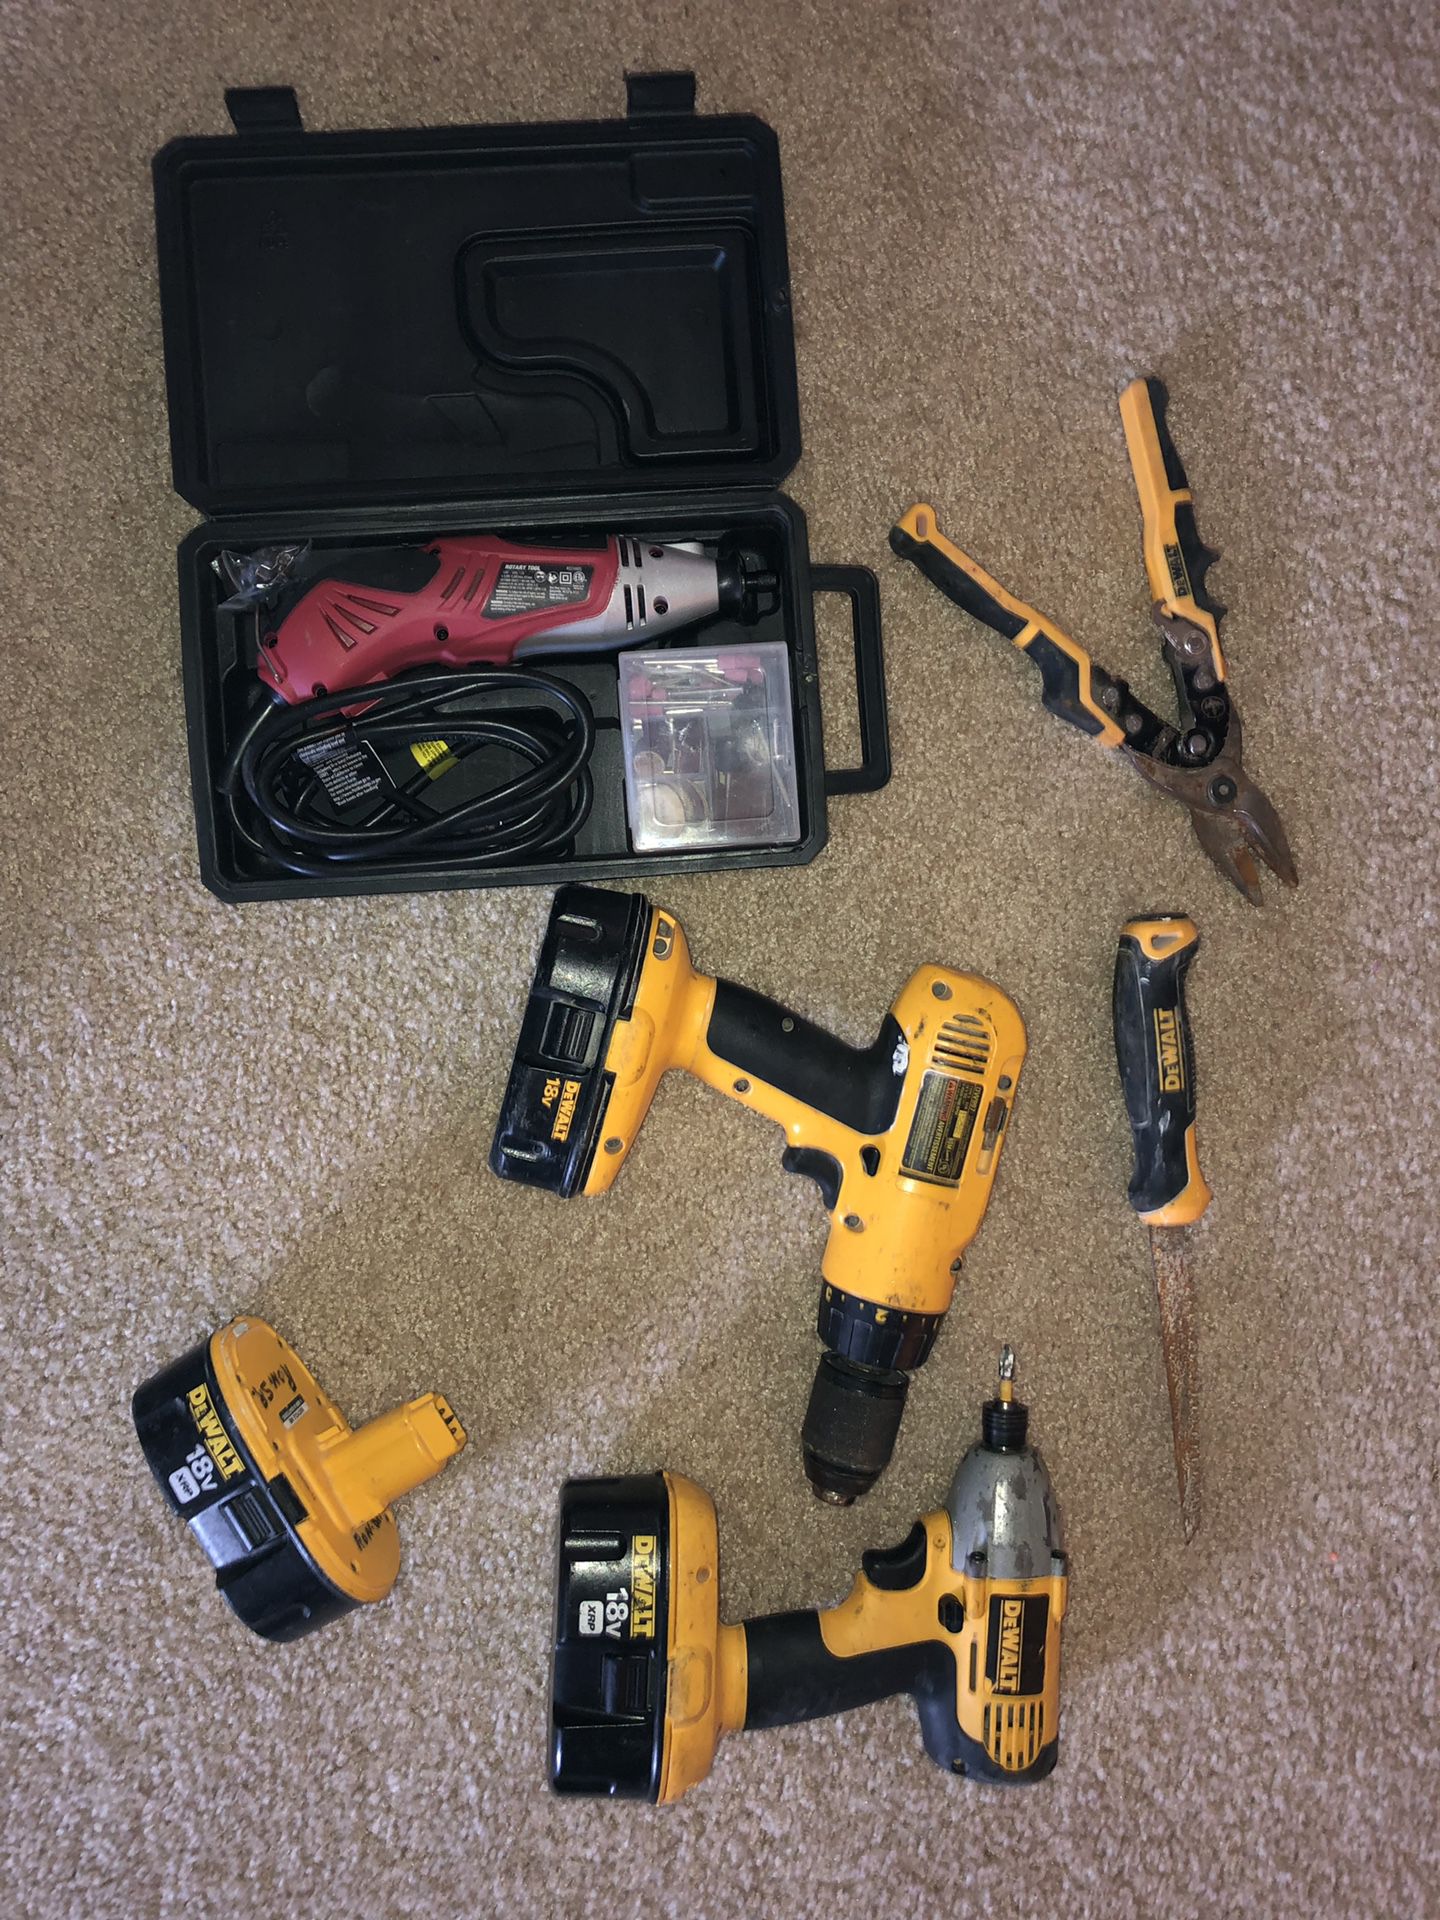 Power tool in good conditions